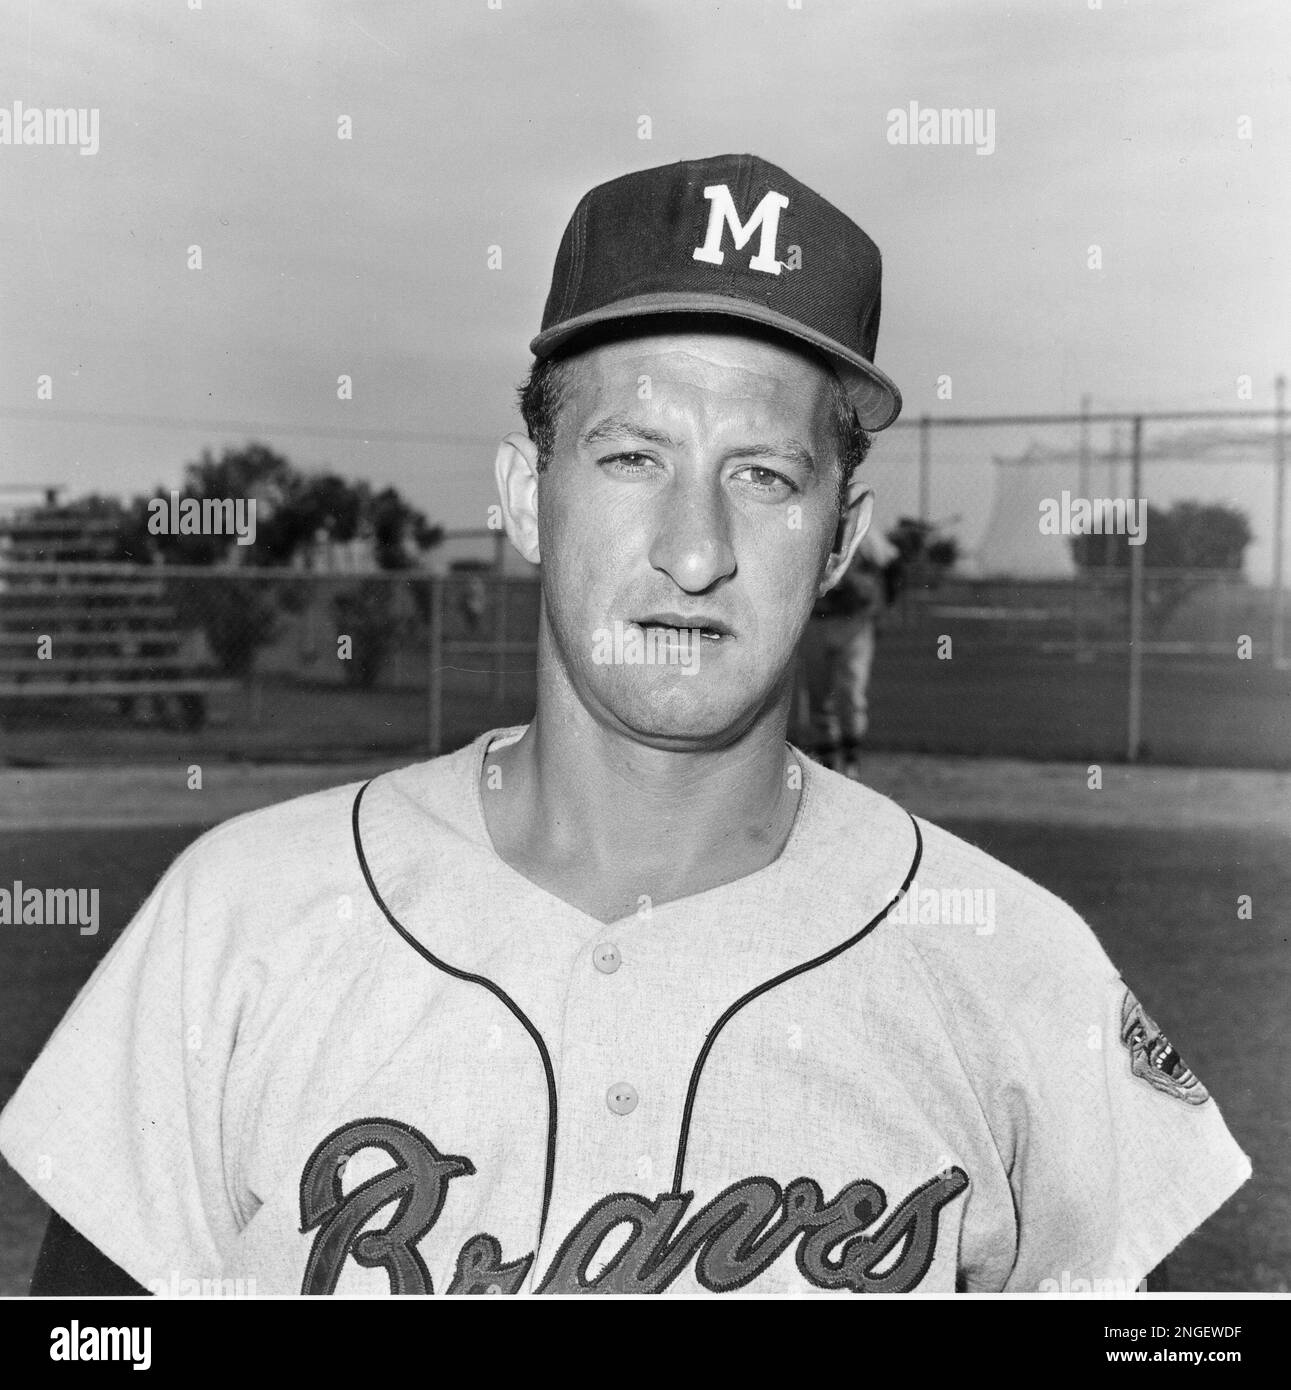 Bob Uecker, catcher for the Milwaukee Braves, is shown on March 6